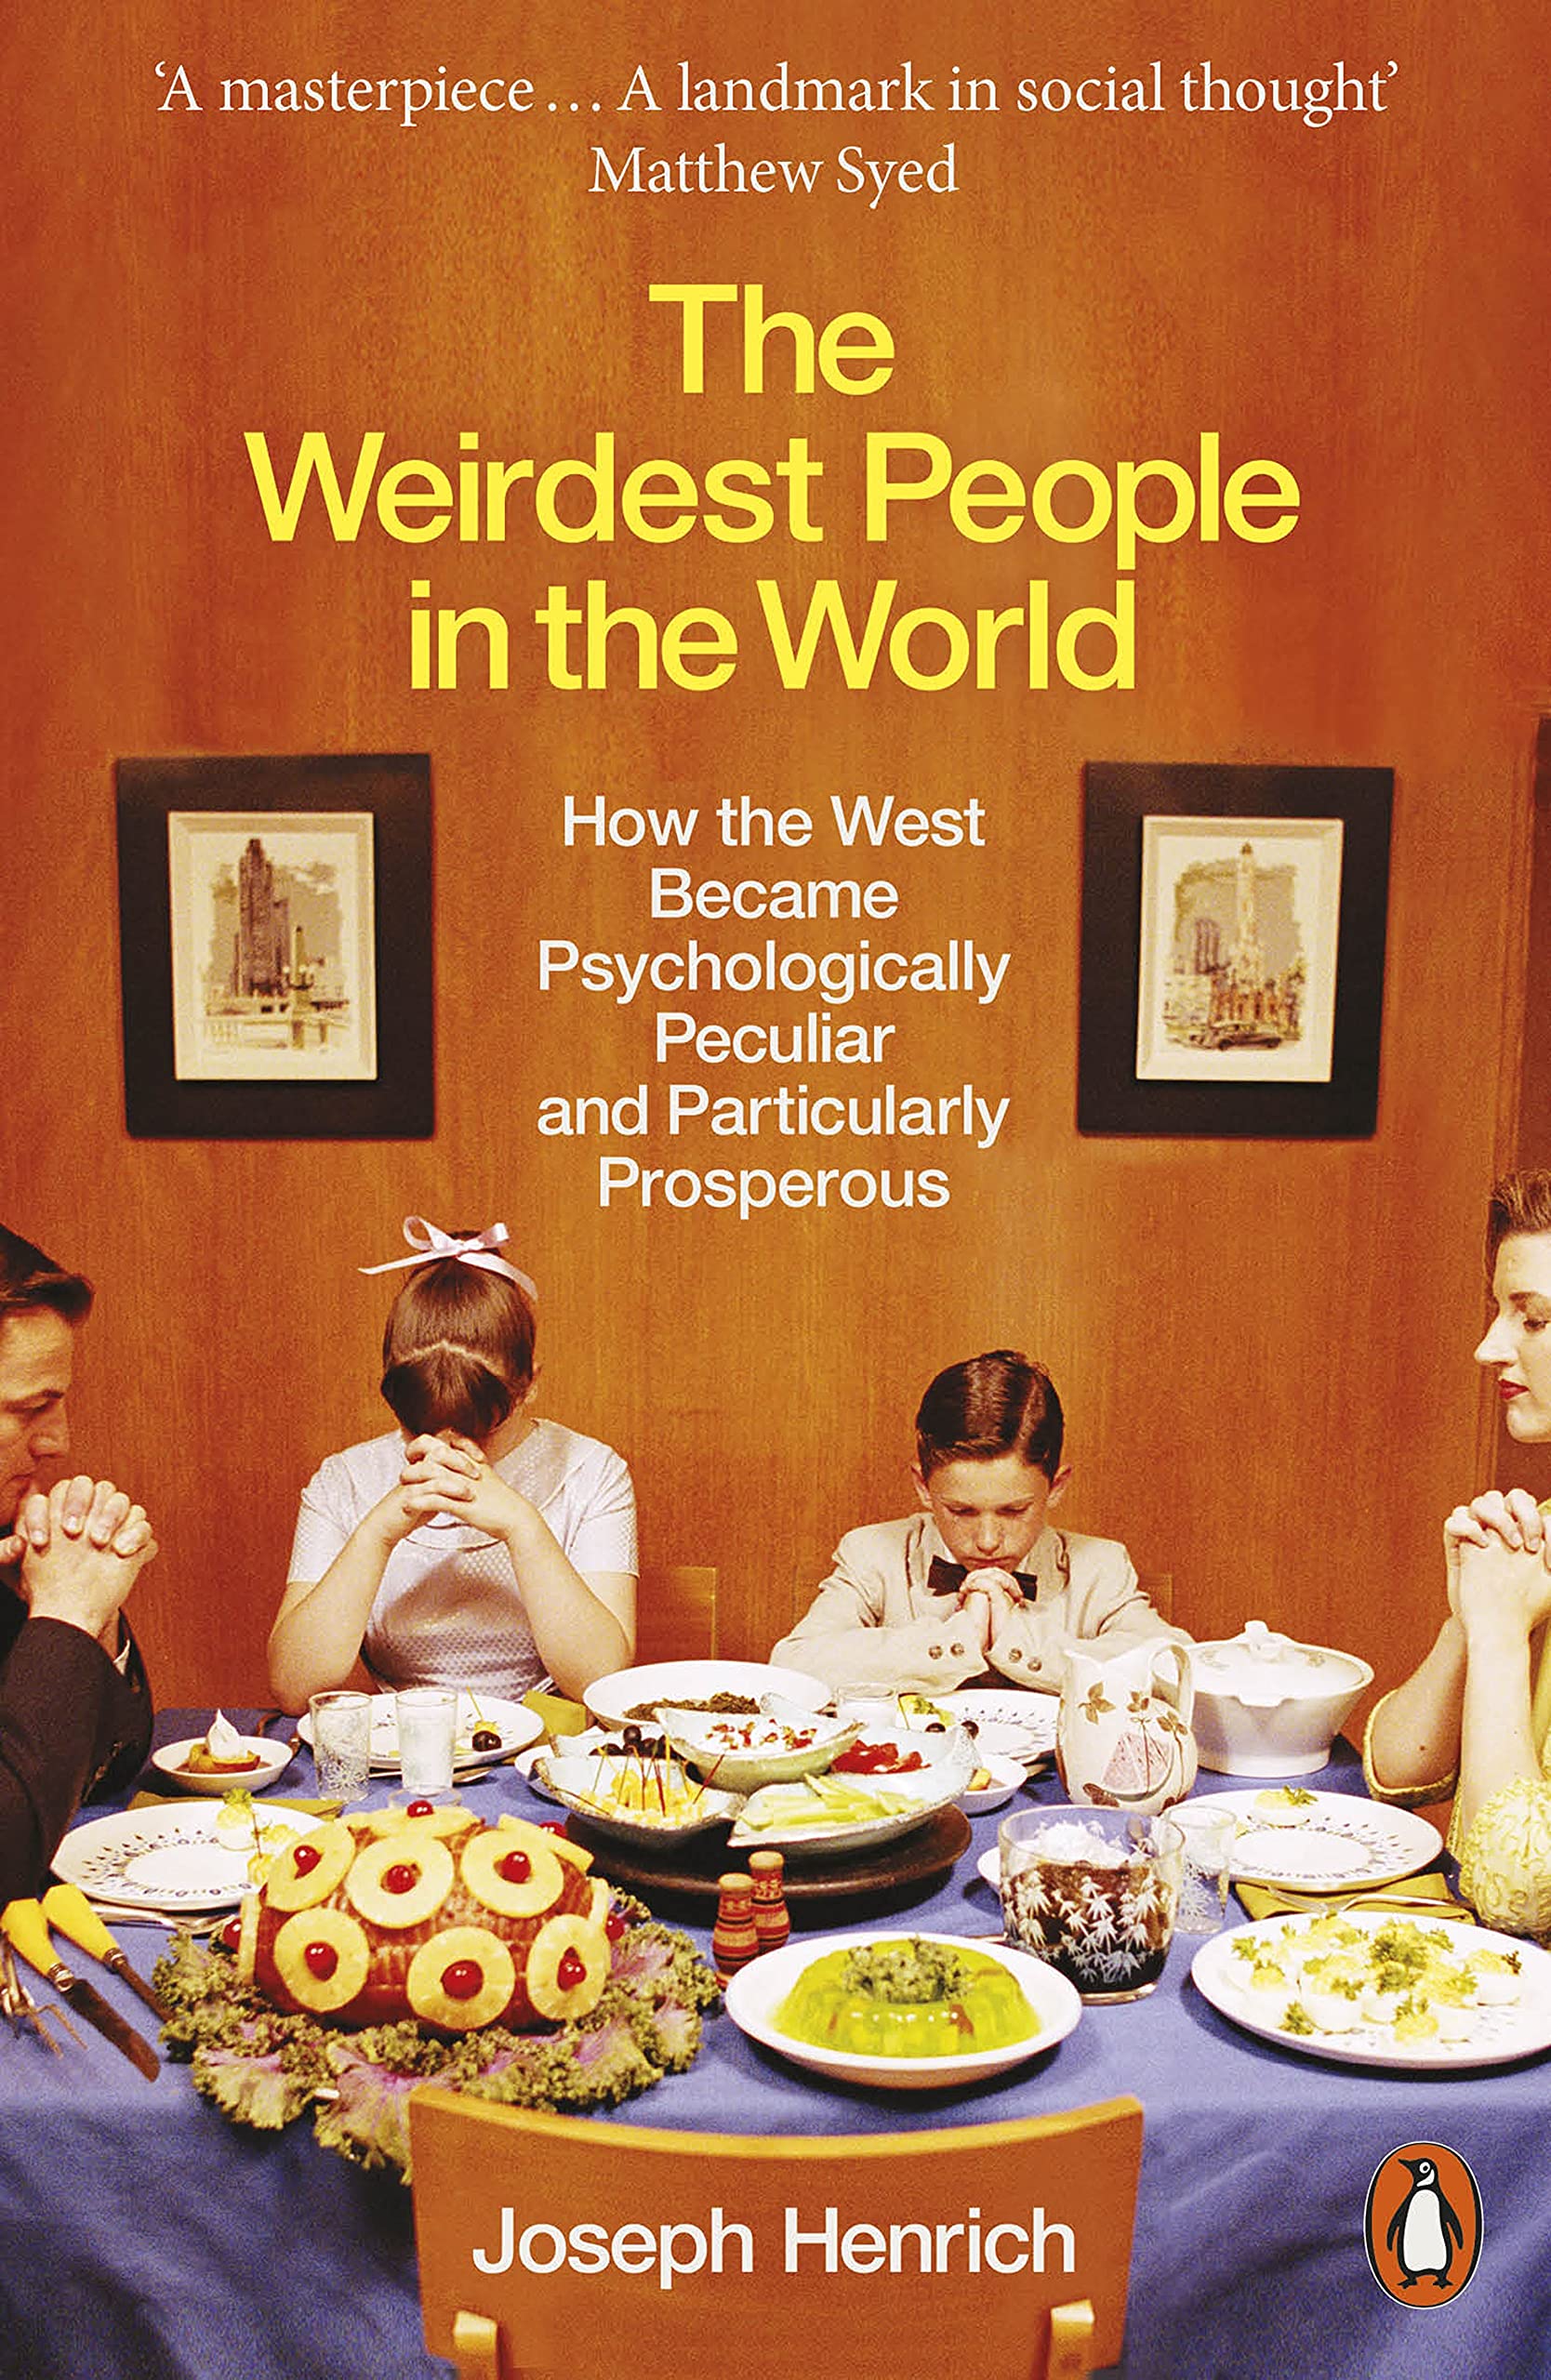 The Weirdest People in the World : How the West Became Psychologically Peculiar and Particularly Prosperous (Paperback)